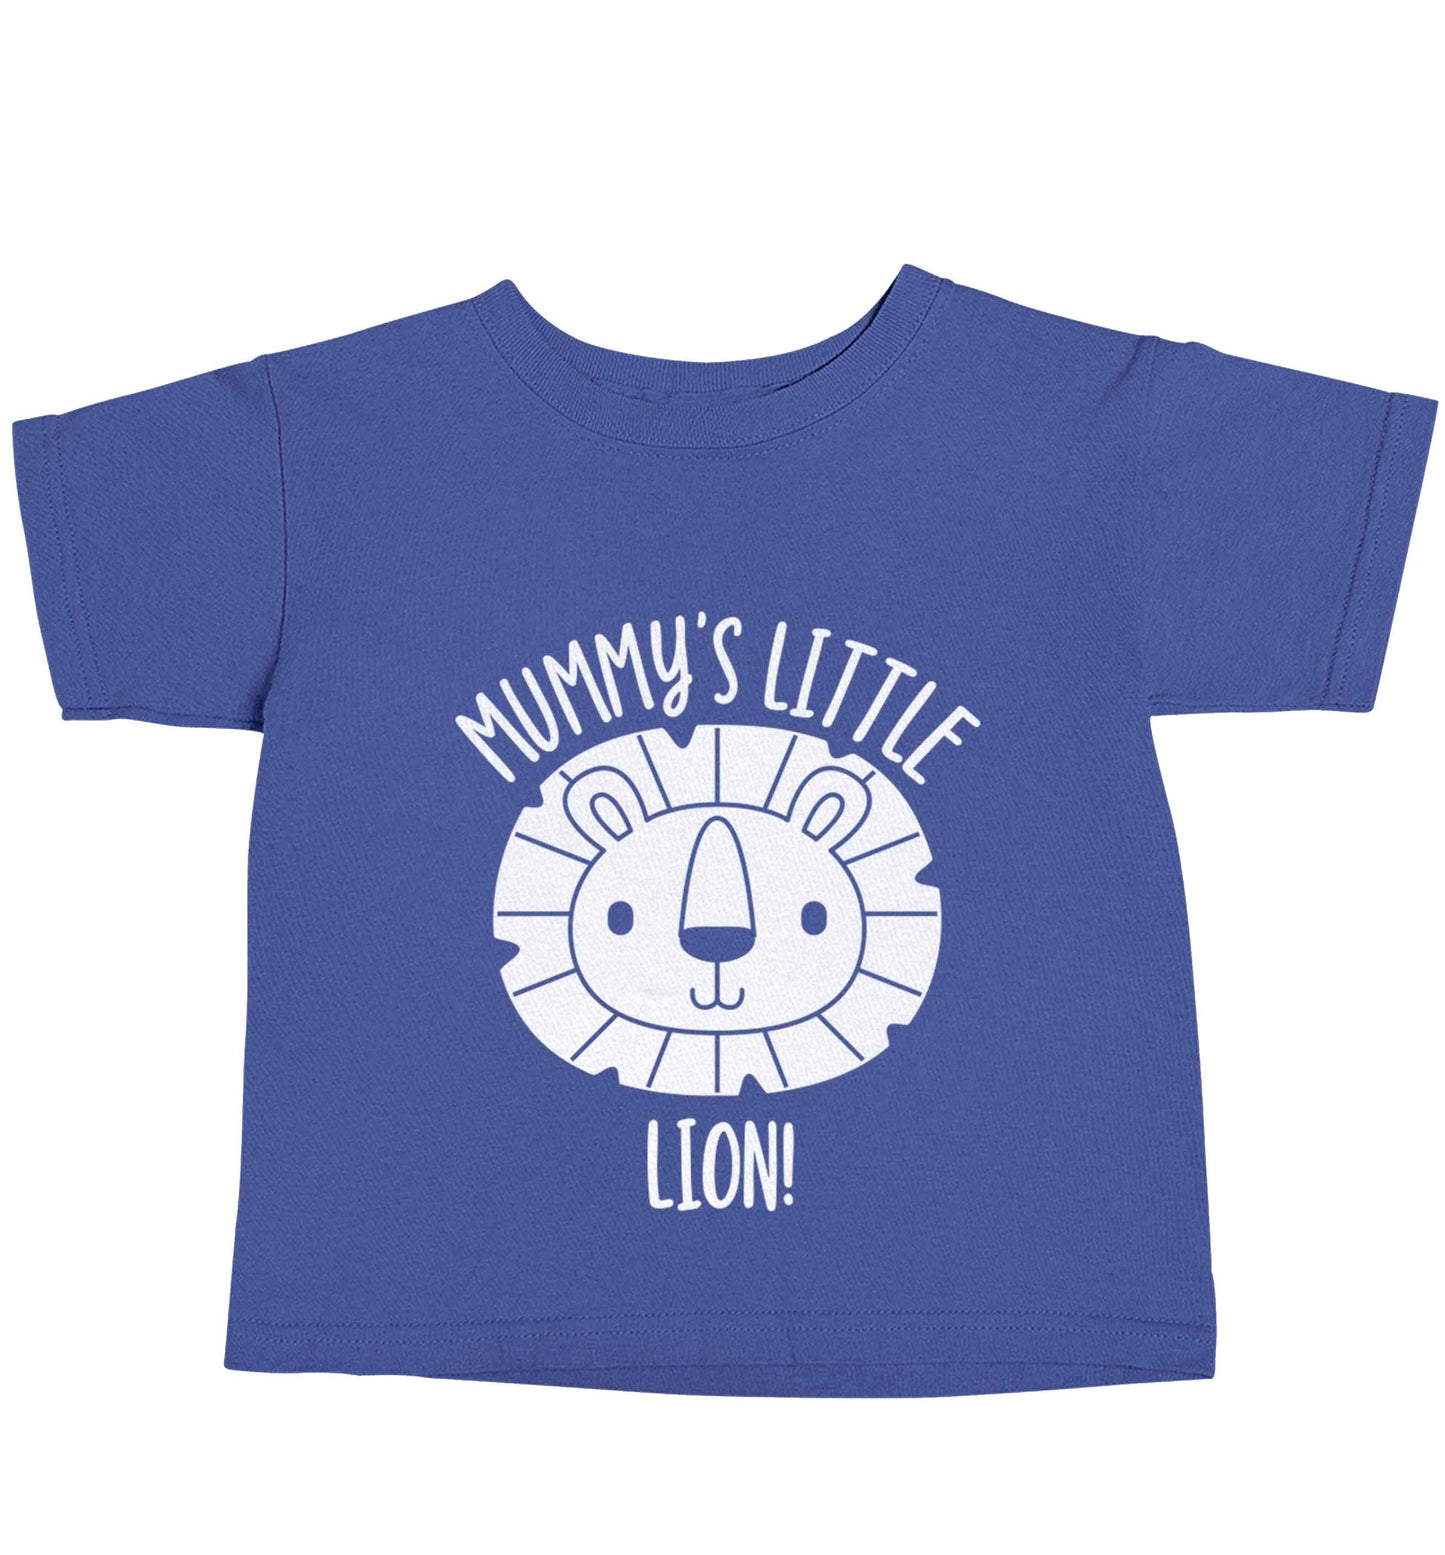 Mummy's little lion blue baby toddler Tshirt 2 Years